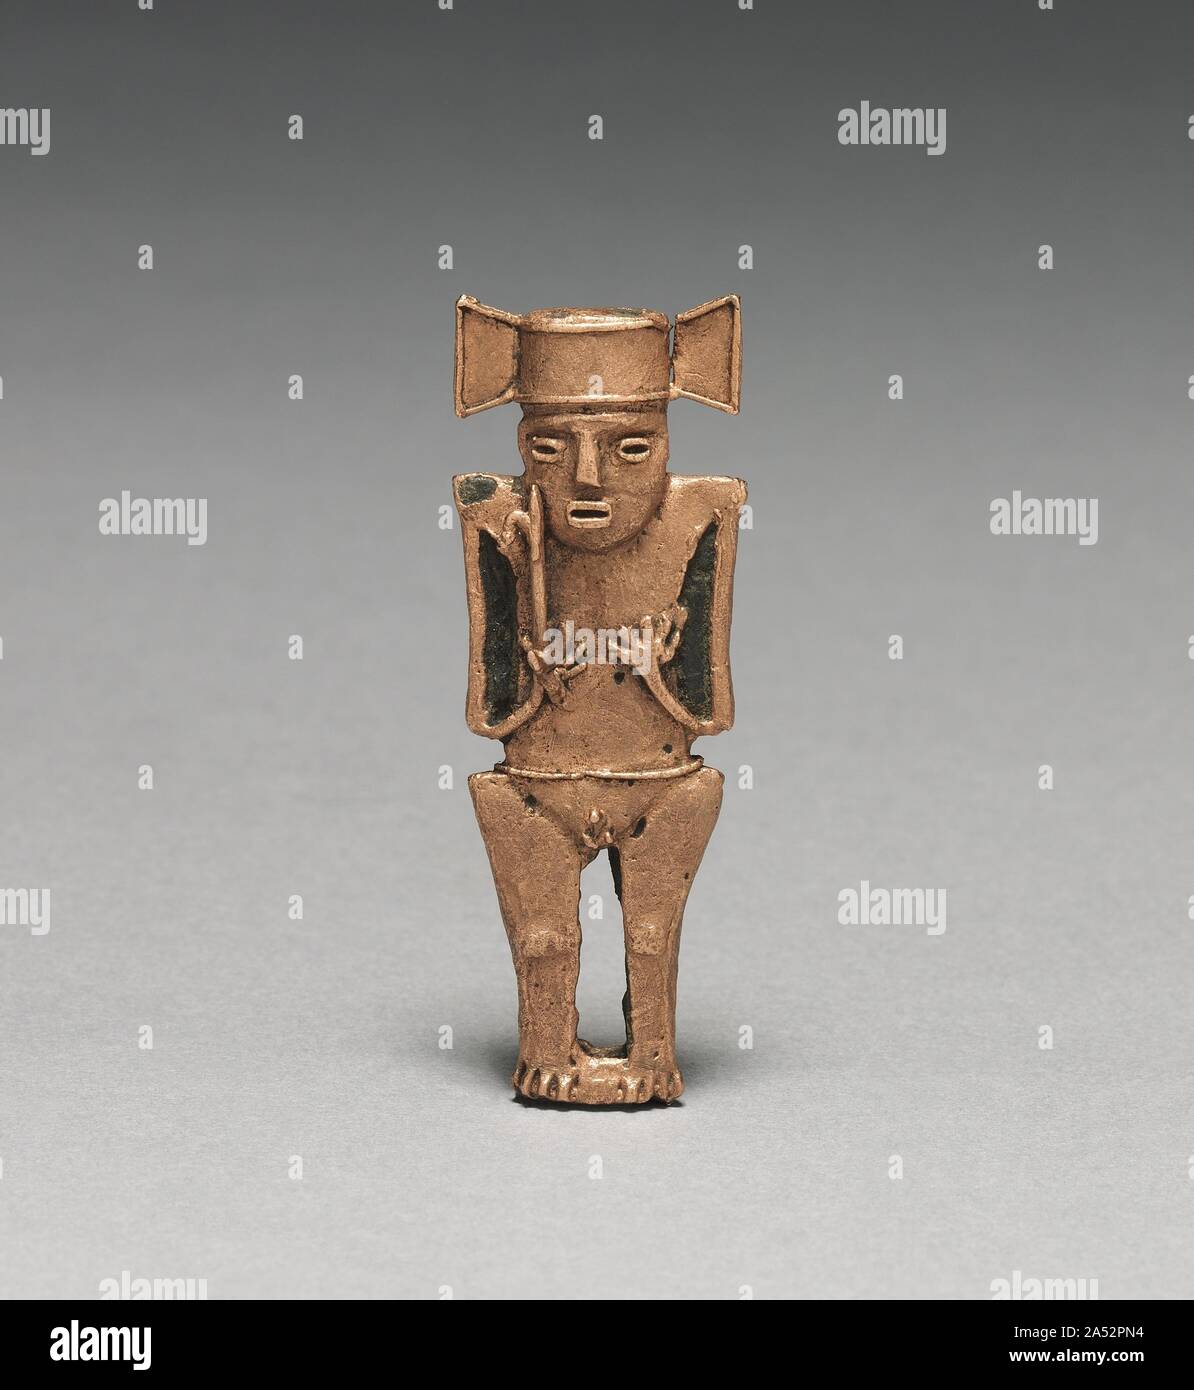 Tunjos (Votive Offering Figurine), c. 900-1550. Unlike the other gold ornaments in this gallery, tunjos were not worn; instead, they served as offerings that were deposited in sacred places, such as lagoons and caves. They often depict humans who hold something-here a container with a head (1947.22), a spear thrower (1947.19), and a bird-tipped (1957.25). The subject must have corresponded to a benefit being asked from the gods. Perhaps because they were not meant for display, tunjos were not finished after lost-wax casting. Flaws remain uncorrected, surfaces are unpolished, and gold that back Stock Photo